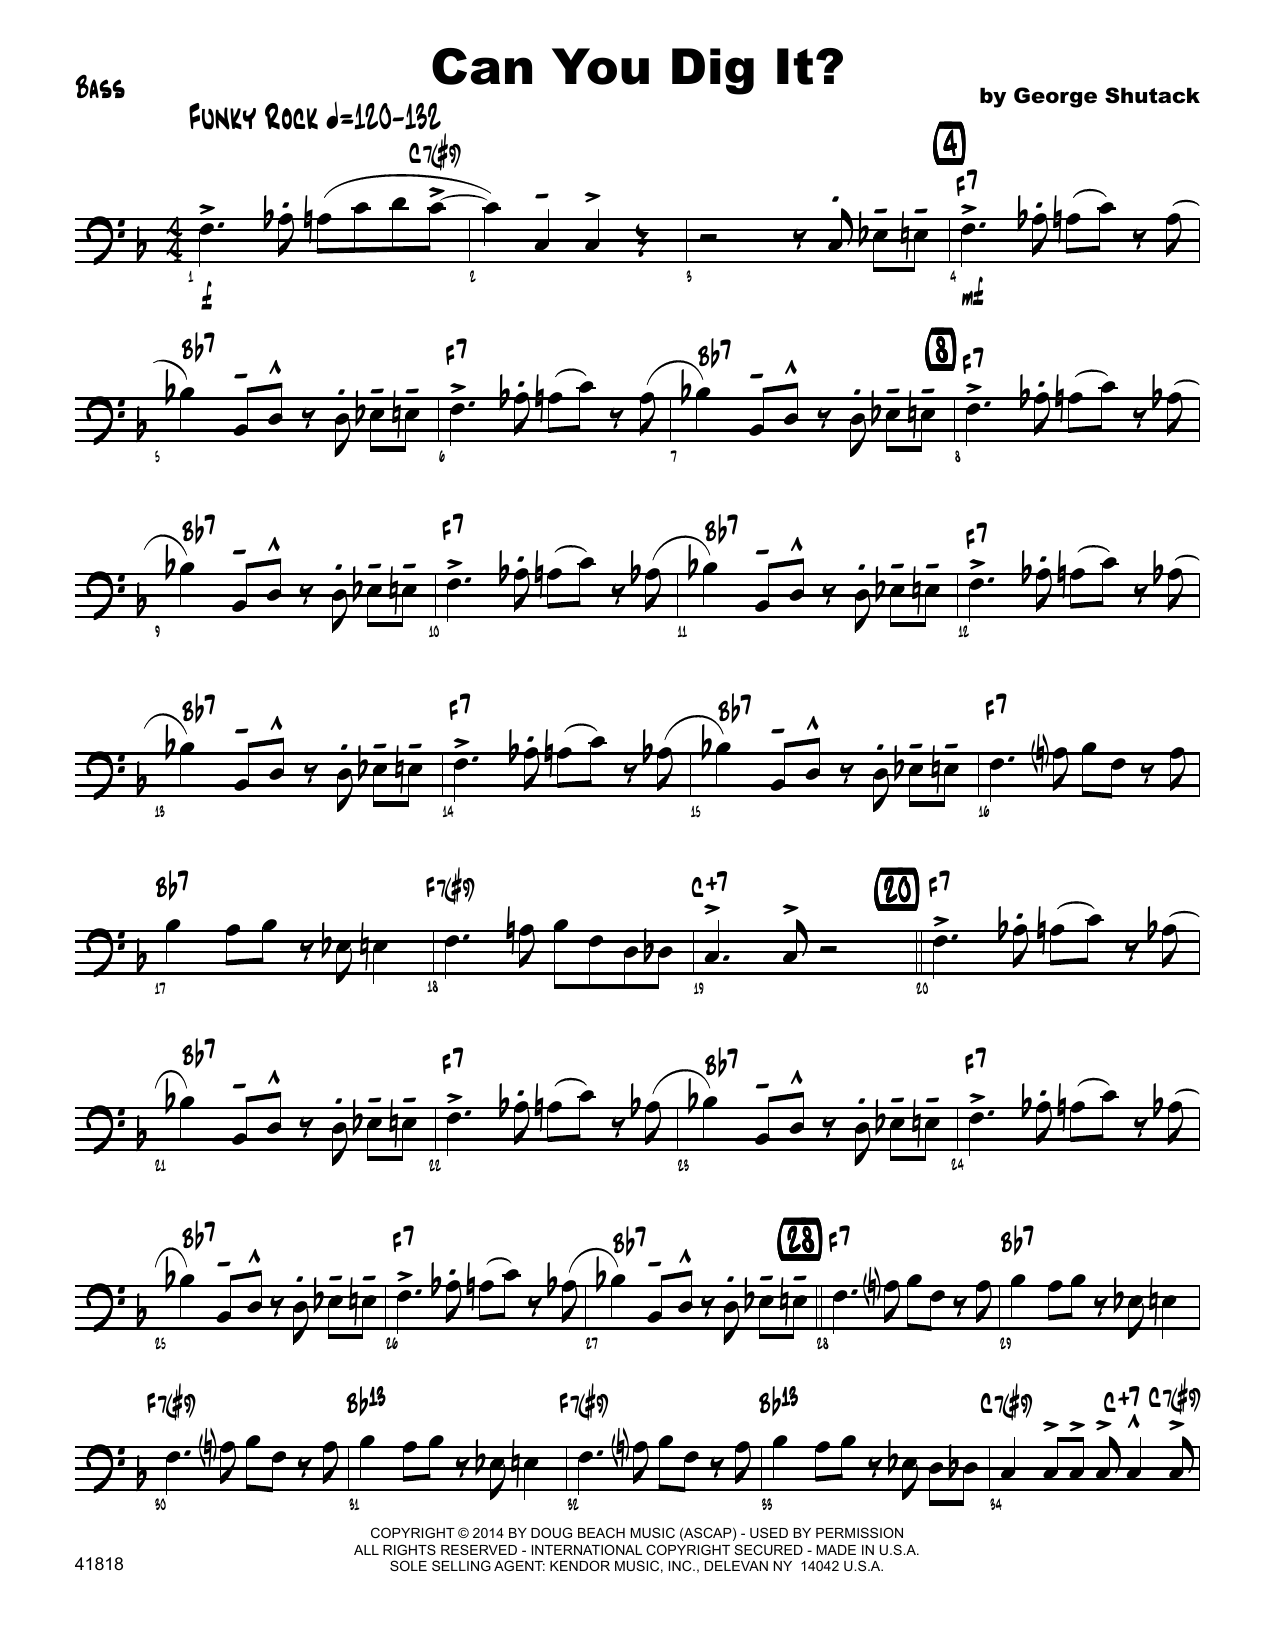 Download George Shutack Can You Dig It? - Bass Sheet Music